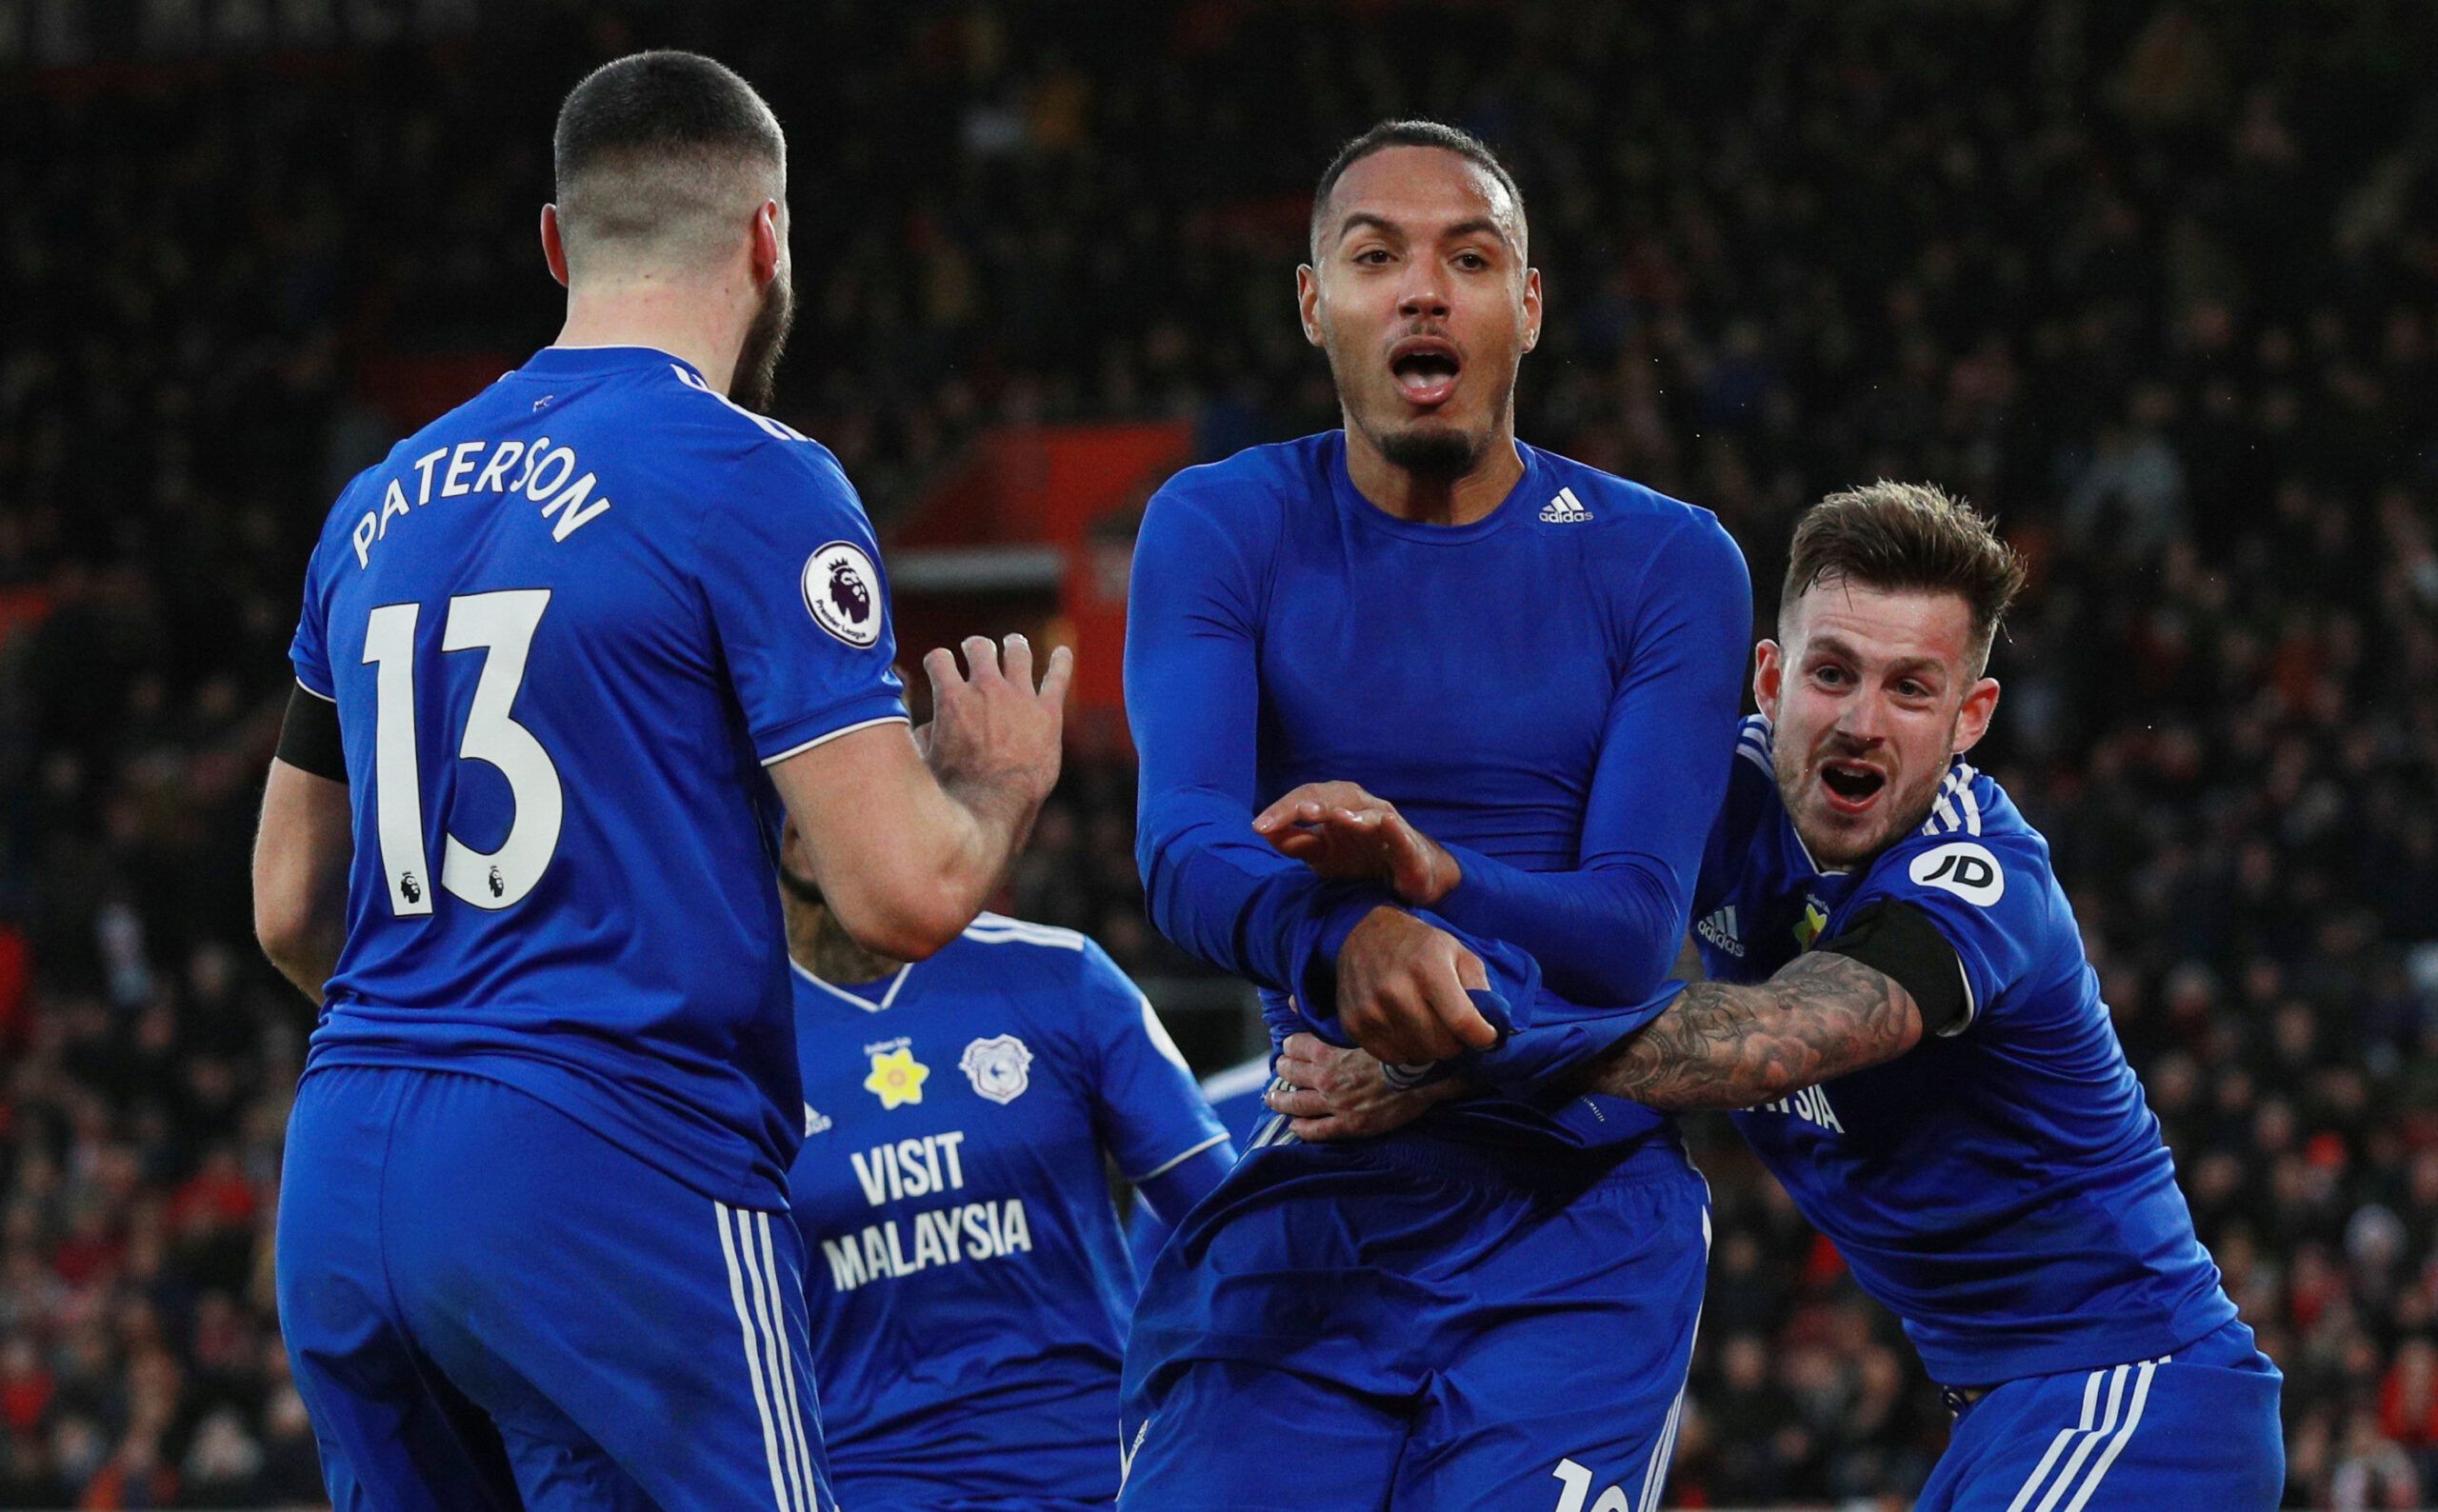 Soccer Football - Premier League - Southampton v Cardiff City - St Mary's Stadium, Southampton, Britain - February 9, 2019  Cardiff City's Kenneth Zohore celebrates scoring their second goal with team mates      REUTERS/Ian Walton  EDITORIAL USE ONLY. No use with unauthorized audio, video, data, fixture lists, club/league logos or 